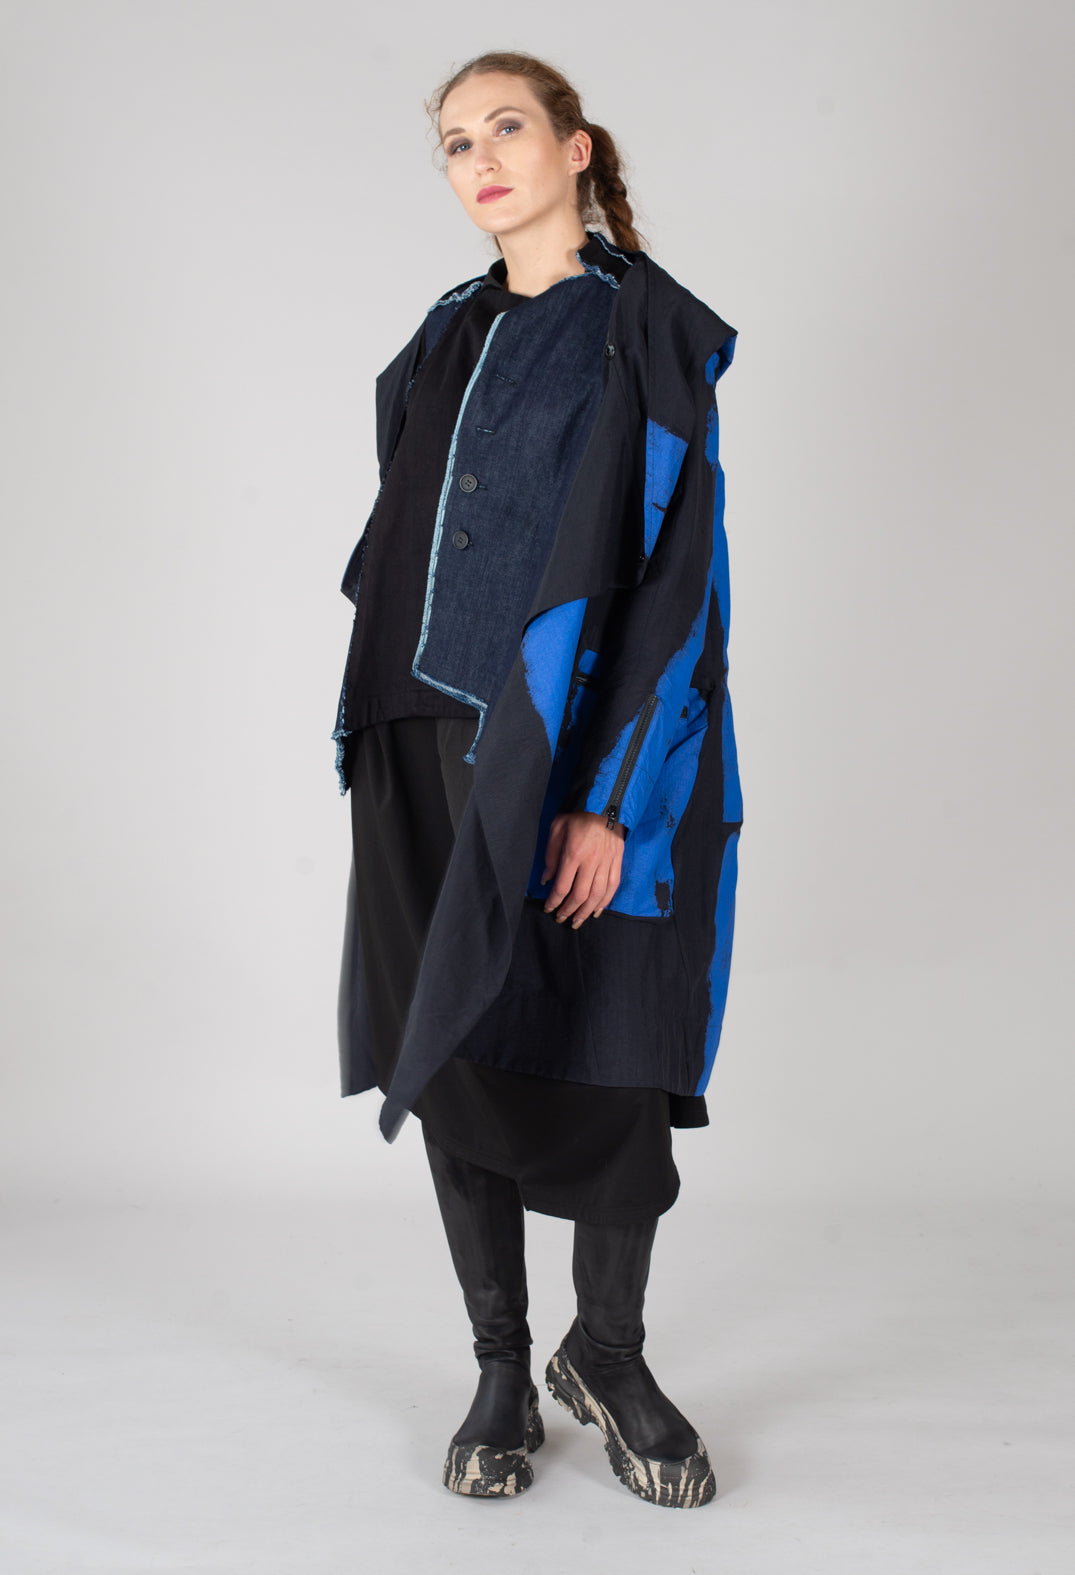 Hooded A-Line Coat in Blue Print